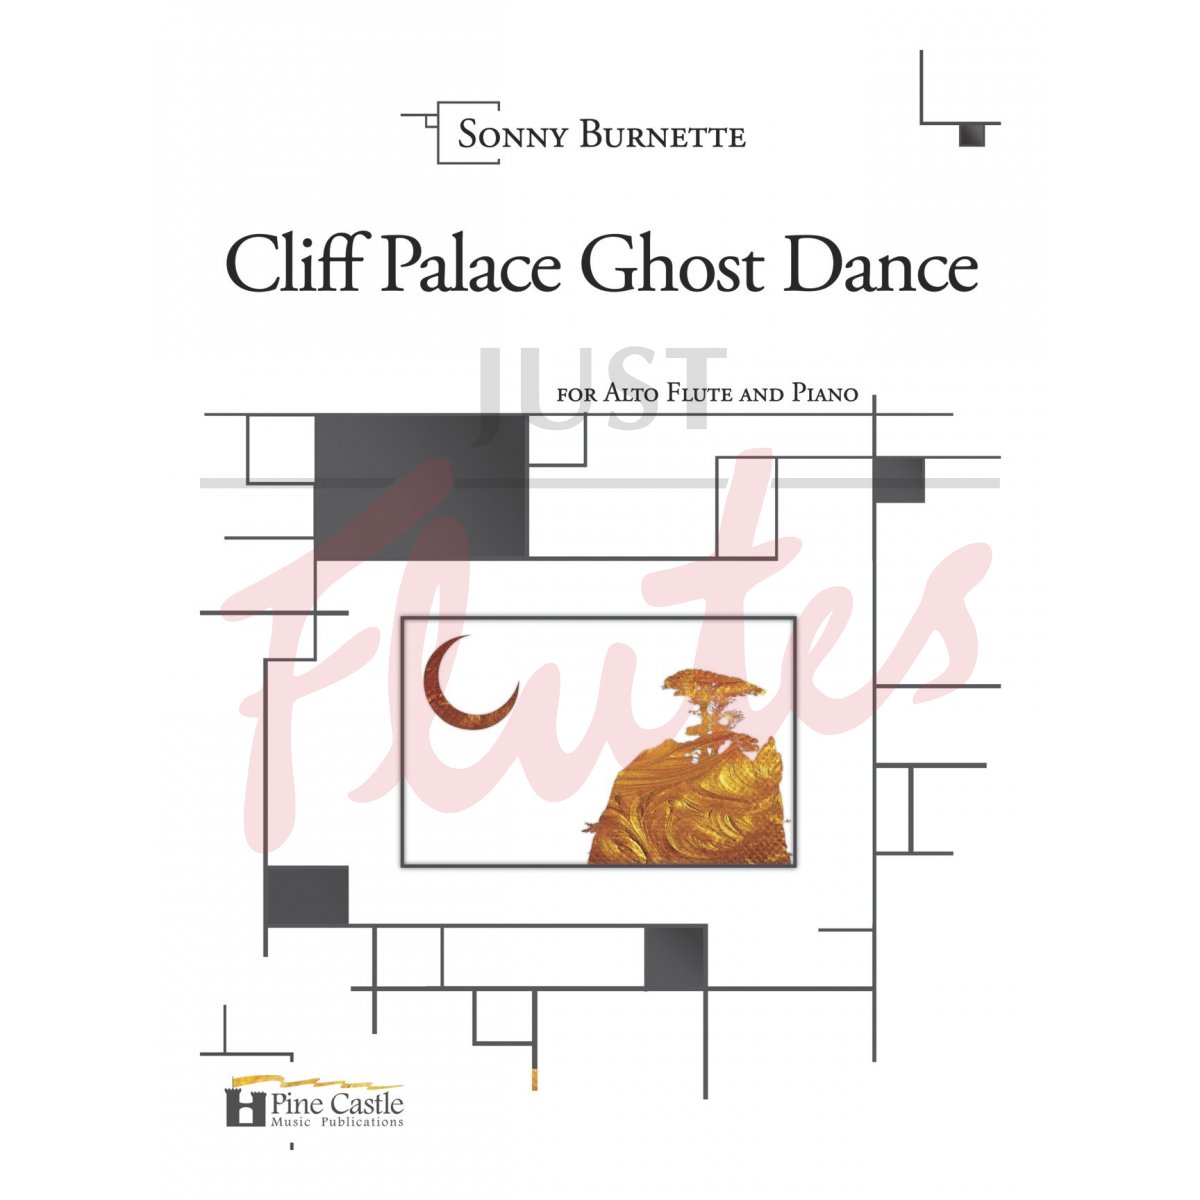 Cliff Palace Ghost Dance for Alto Flute and Piano